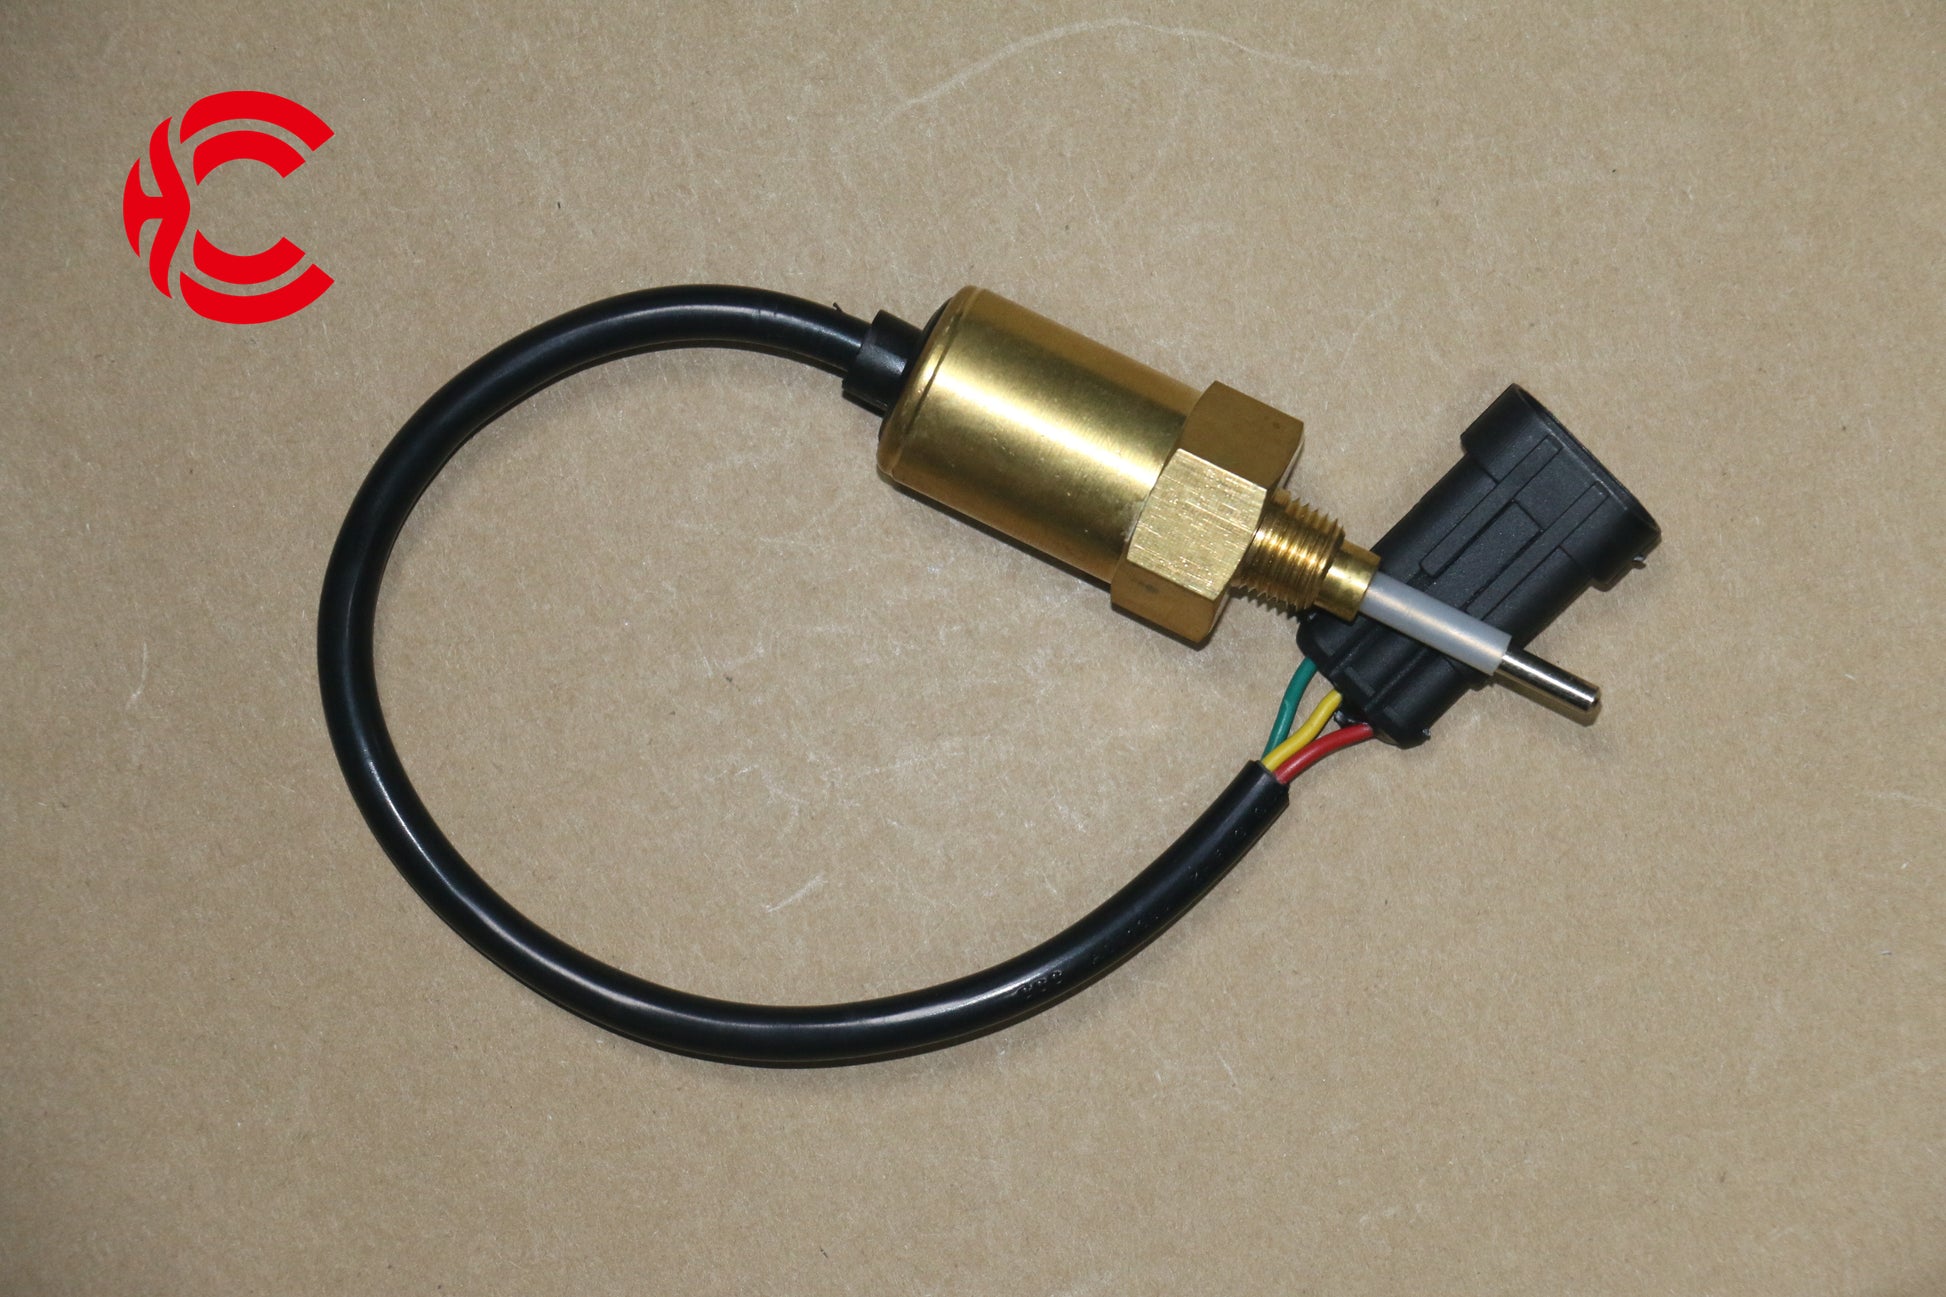 OEM: 8.749.057.000 ANKAIMaterial: ABSColor: BlackOrigin: Made in ChinaWeight: 50gPacking List: 1* Coolant Level Alarm Sensor More ServiceWe can provide OEM Manufacturing serviceWe can Be your one-step solution for Auto PartsWe can provide technical scheme for you Feel Free to Contact Us, We will get back to you as soon as possible.